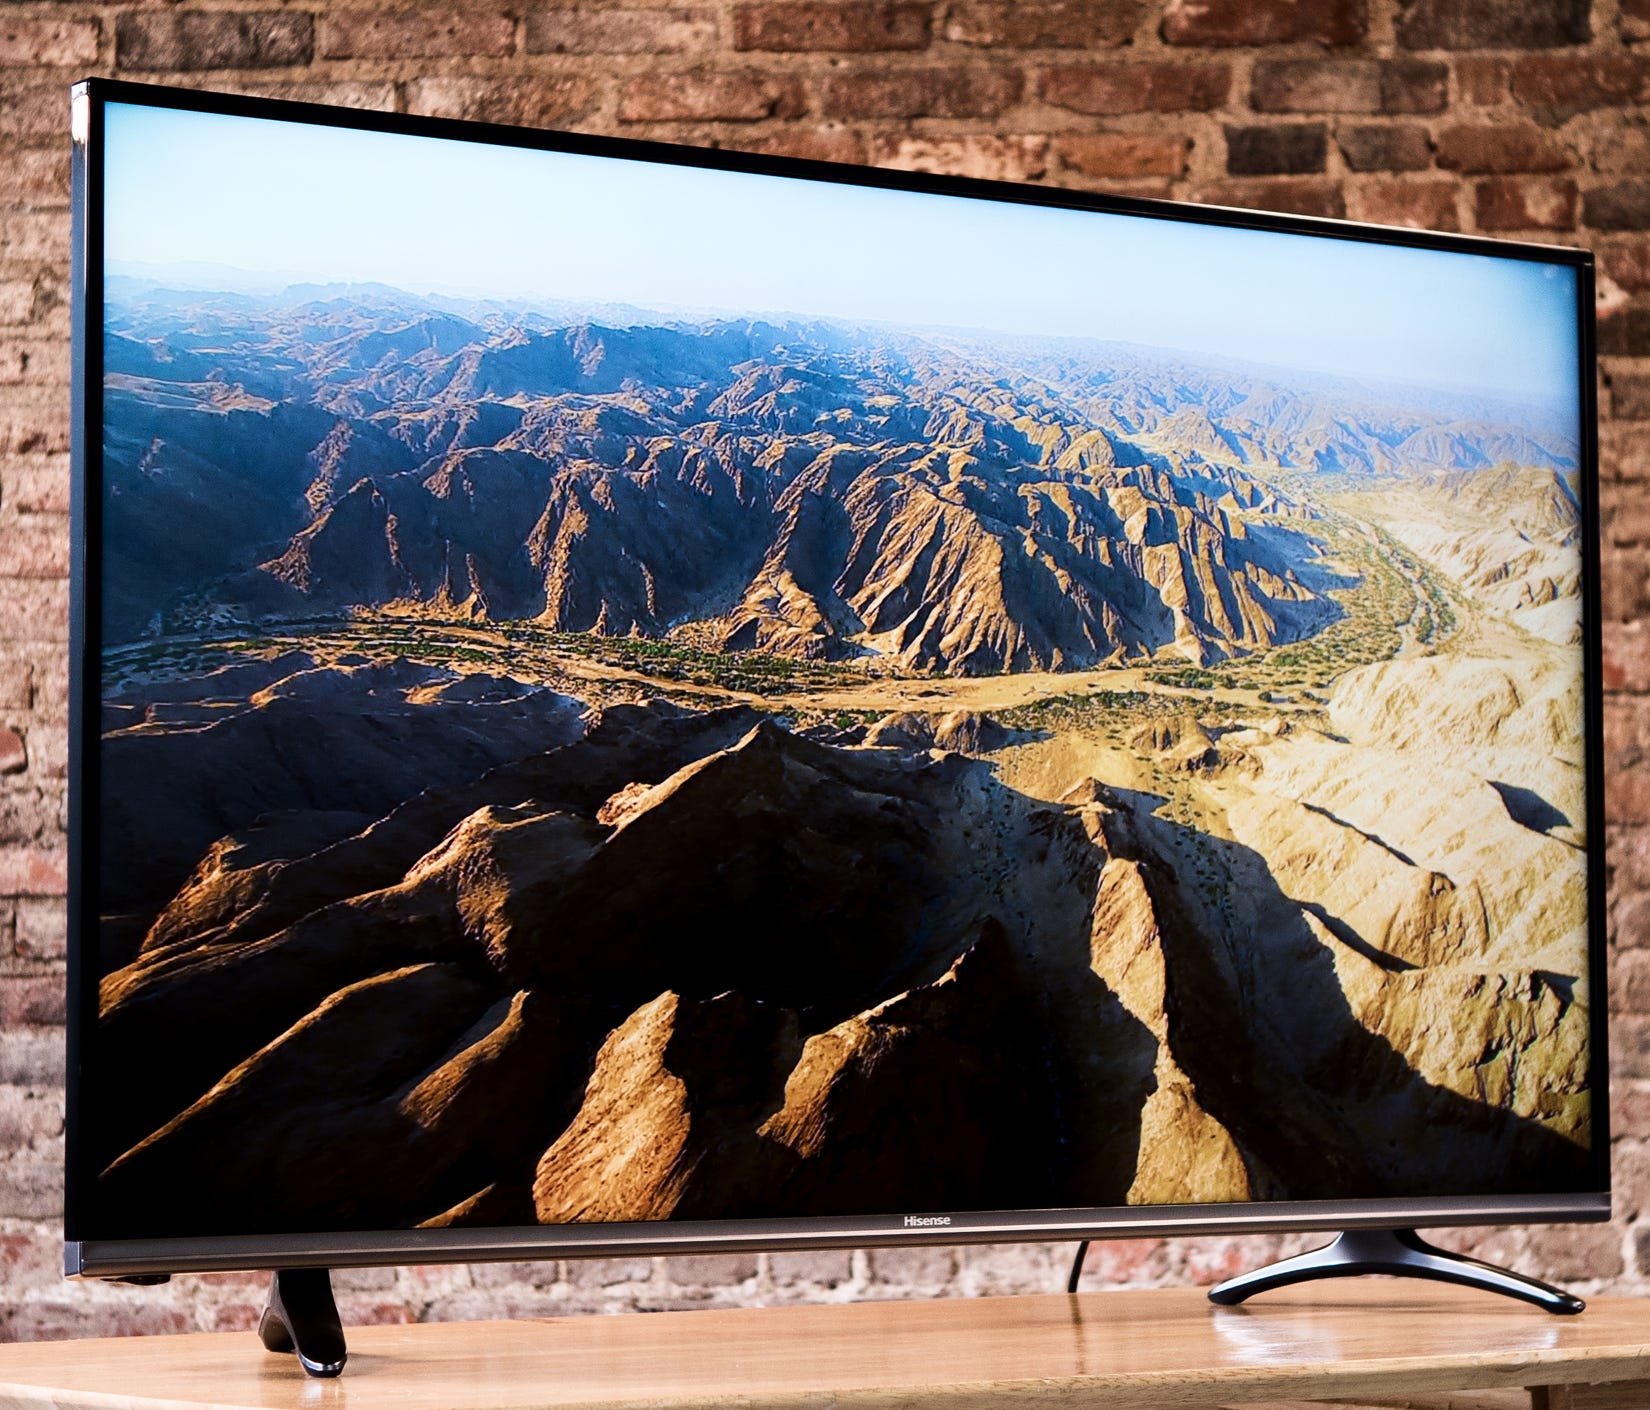 The Samsung MU7000 is one of the best big-screen TV deals right now.